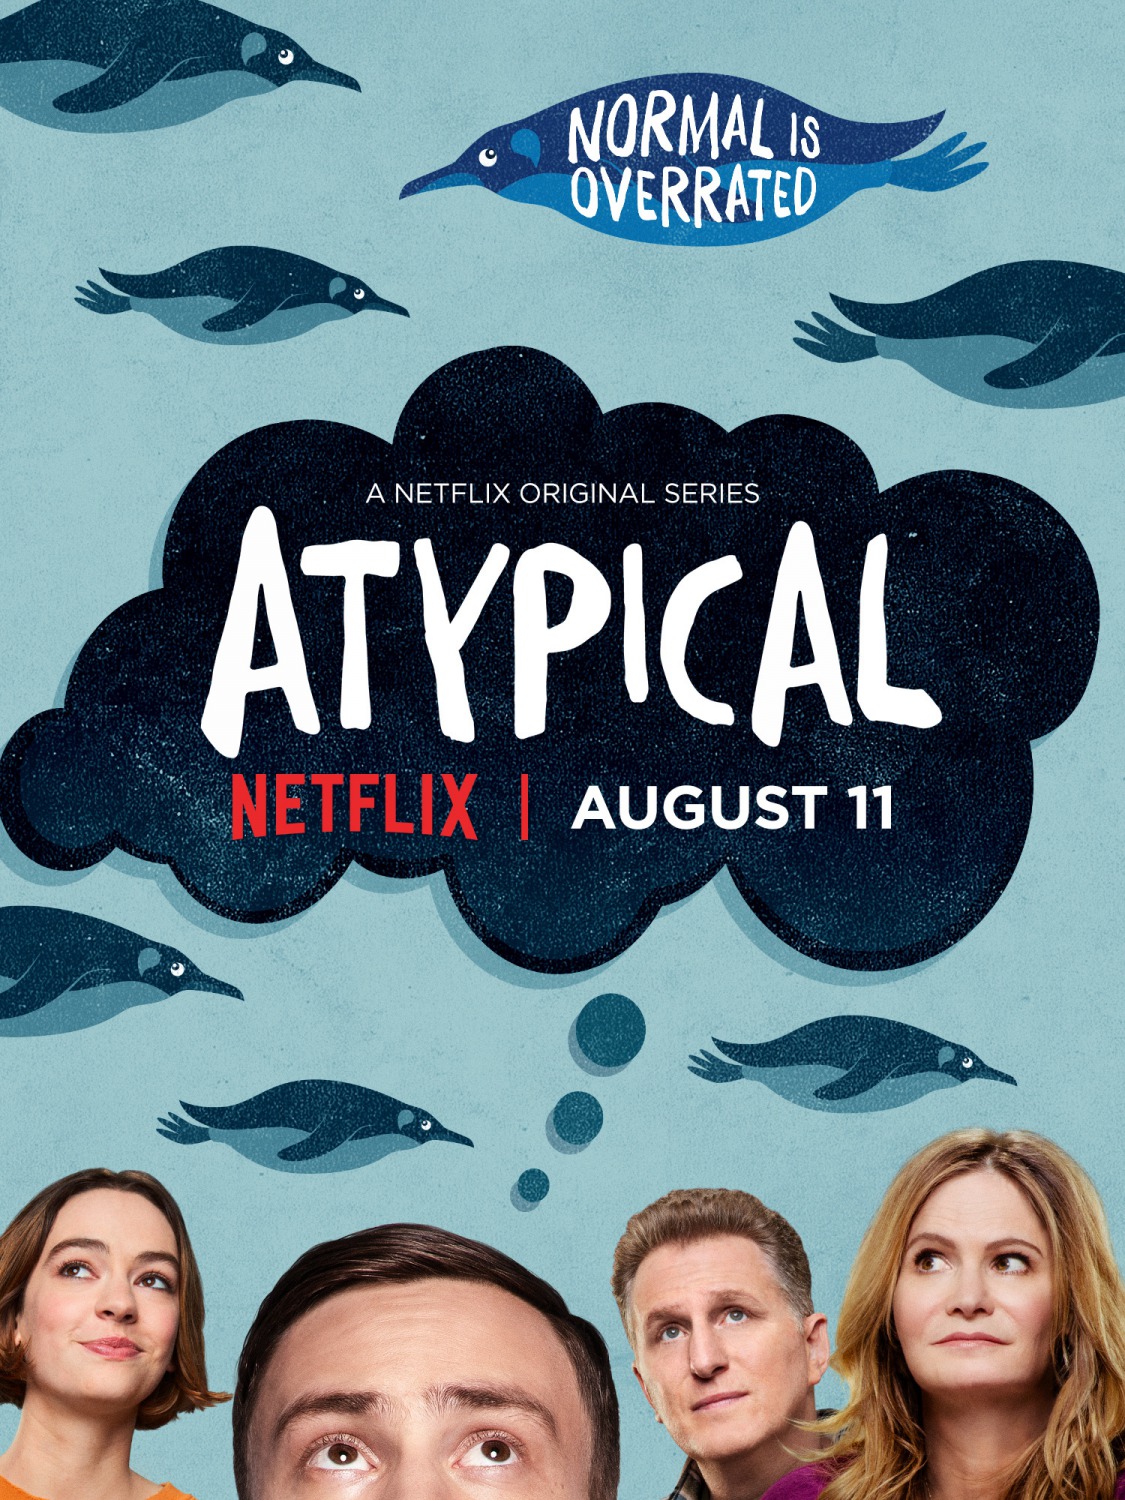 Extra Large Movie Poster Image for Atypical (#1 of 3)